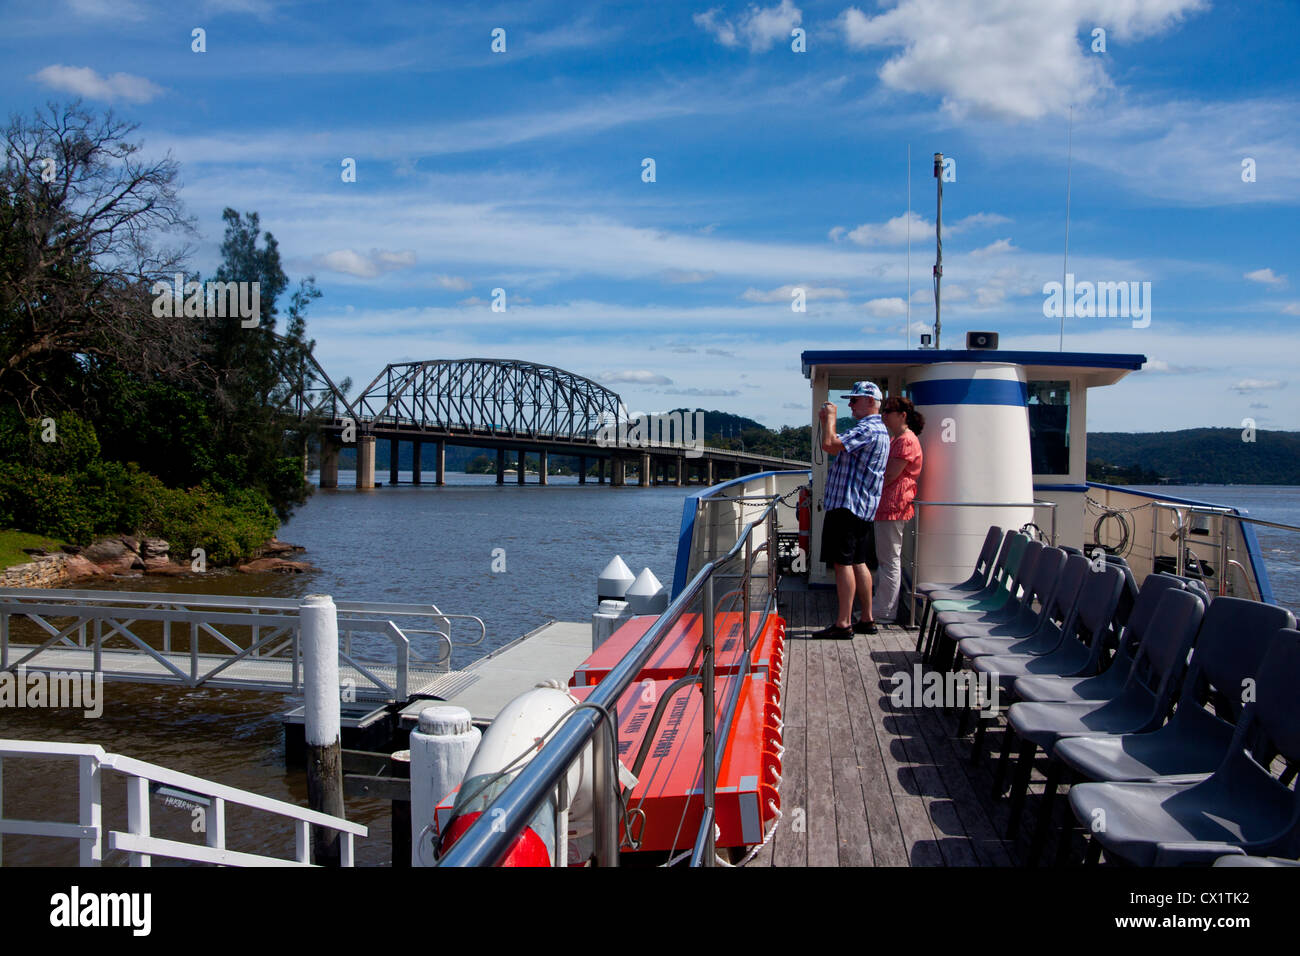 Boat trip on the Hawkesbury Riverboat Postman, with family looking at scenery New South Wales (NSW) Australia Stock Photo